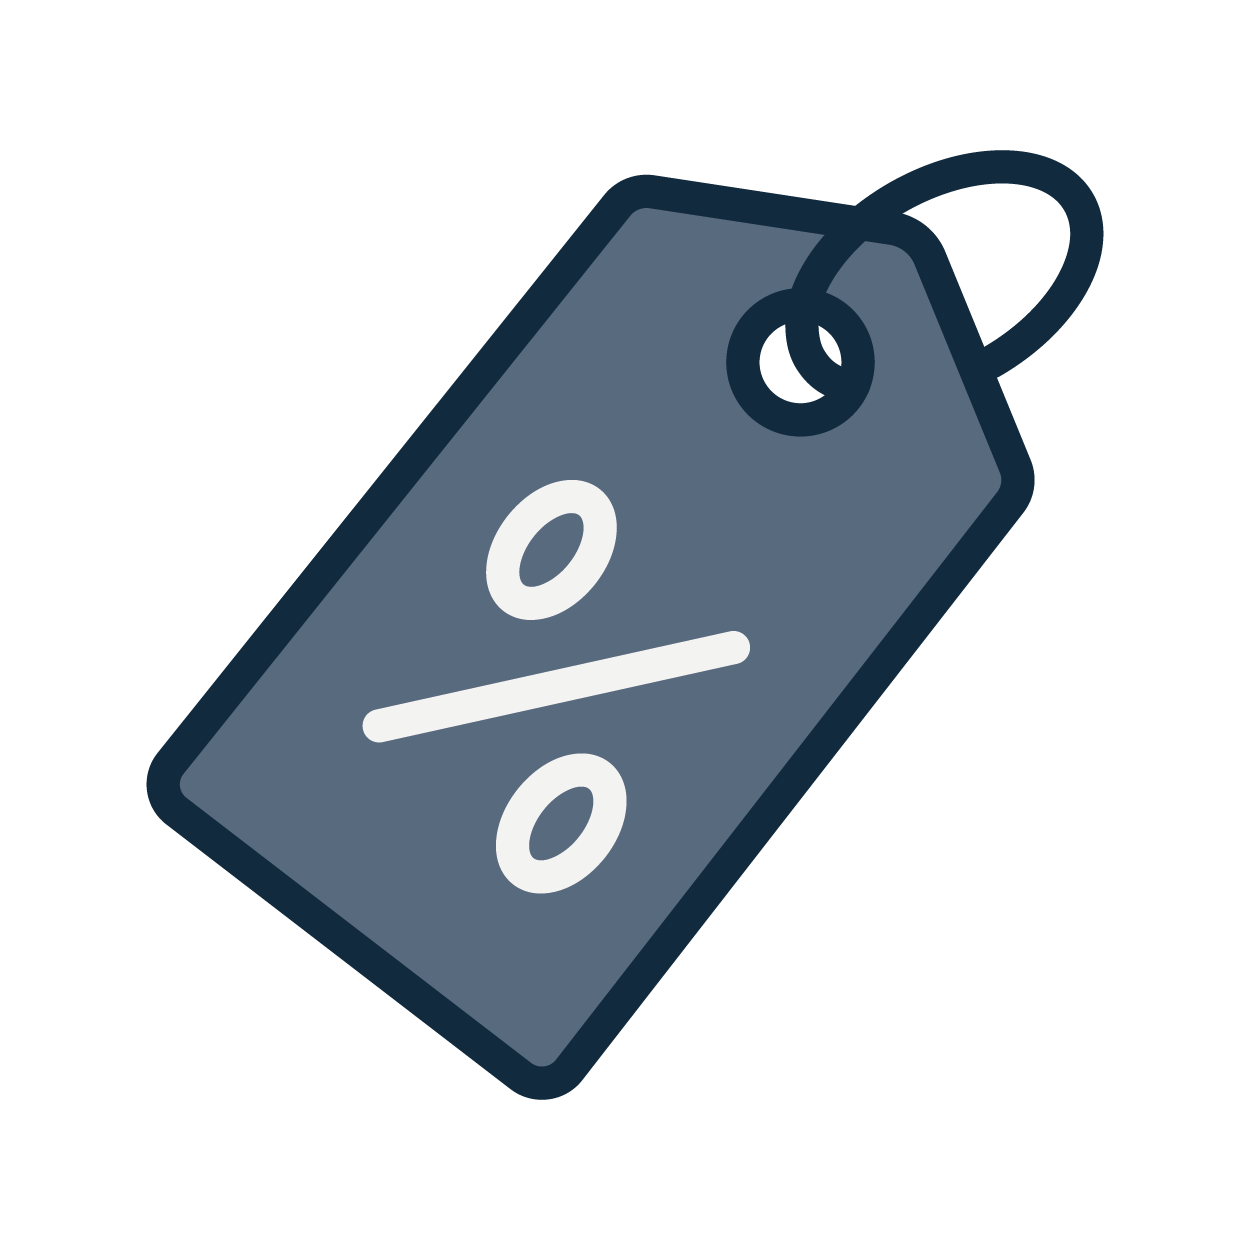 icon image of a blue price tag with a white percent sign written